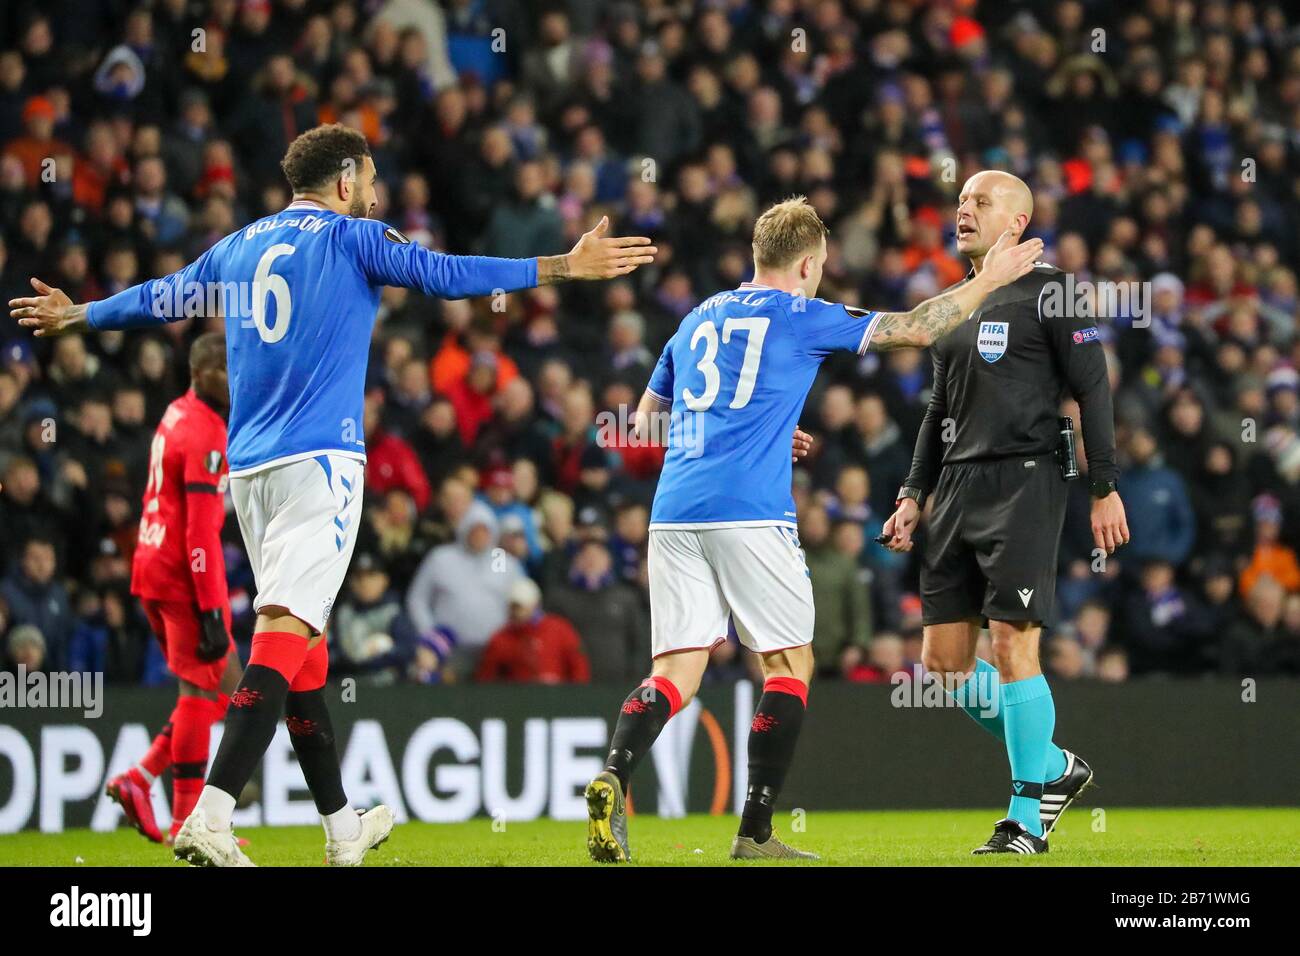 Glasgow, UK. 12th Mar, 2020. Rangers FC played Bayer Leverkusen in Round of 16 -1st leg at Ranger's home stadium, Ibrox, Glasgow. in the UEFA 'Europa' league.According to Steven Gerrard, Ranger's manager, this game provides a great challenge but it is hoped that his team can build on previous performances. Credit: Findlay/Alamy Live News Stock Photo